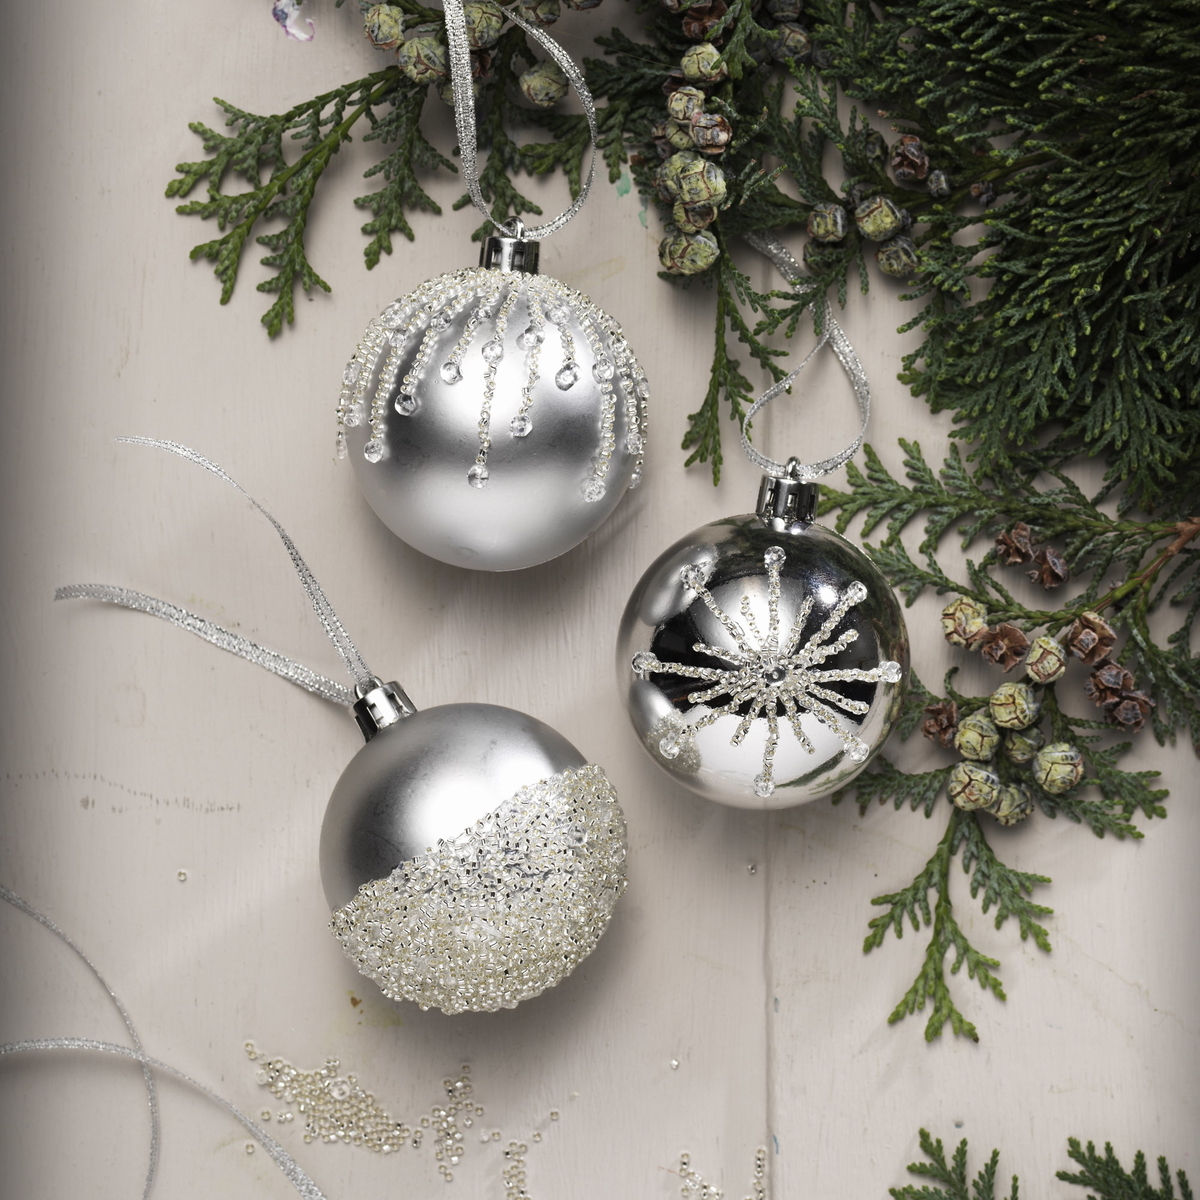 Decorate holiday ornaments with beads